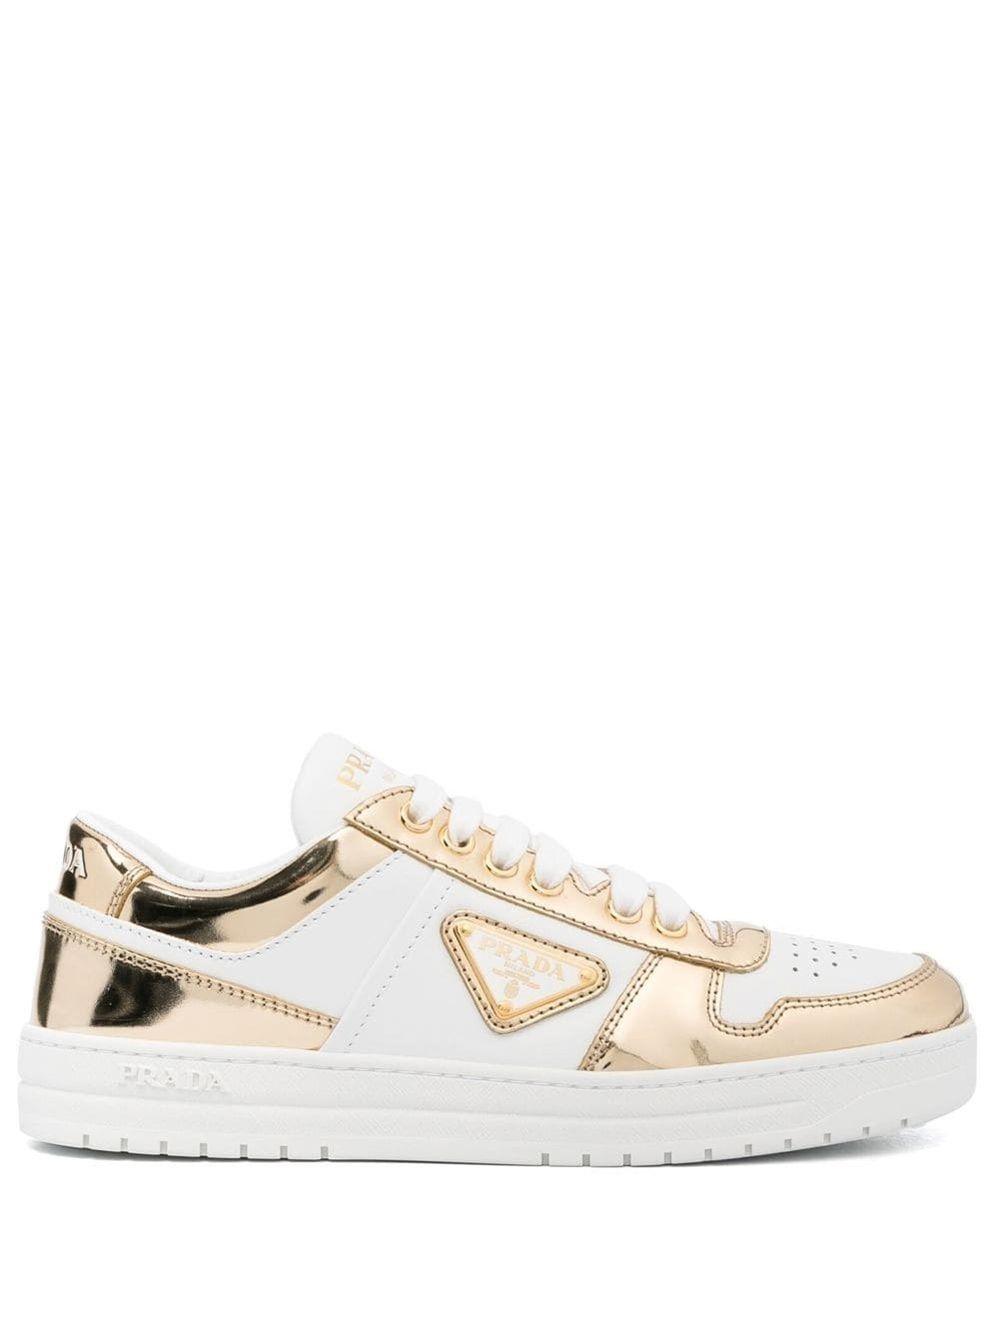 Prada Downtown Leather Low-top Sneakers in White | Lyst